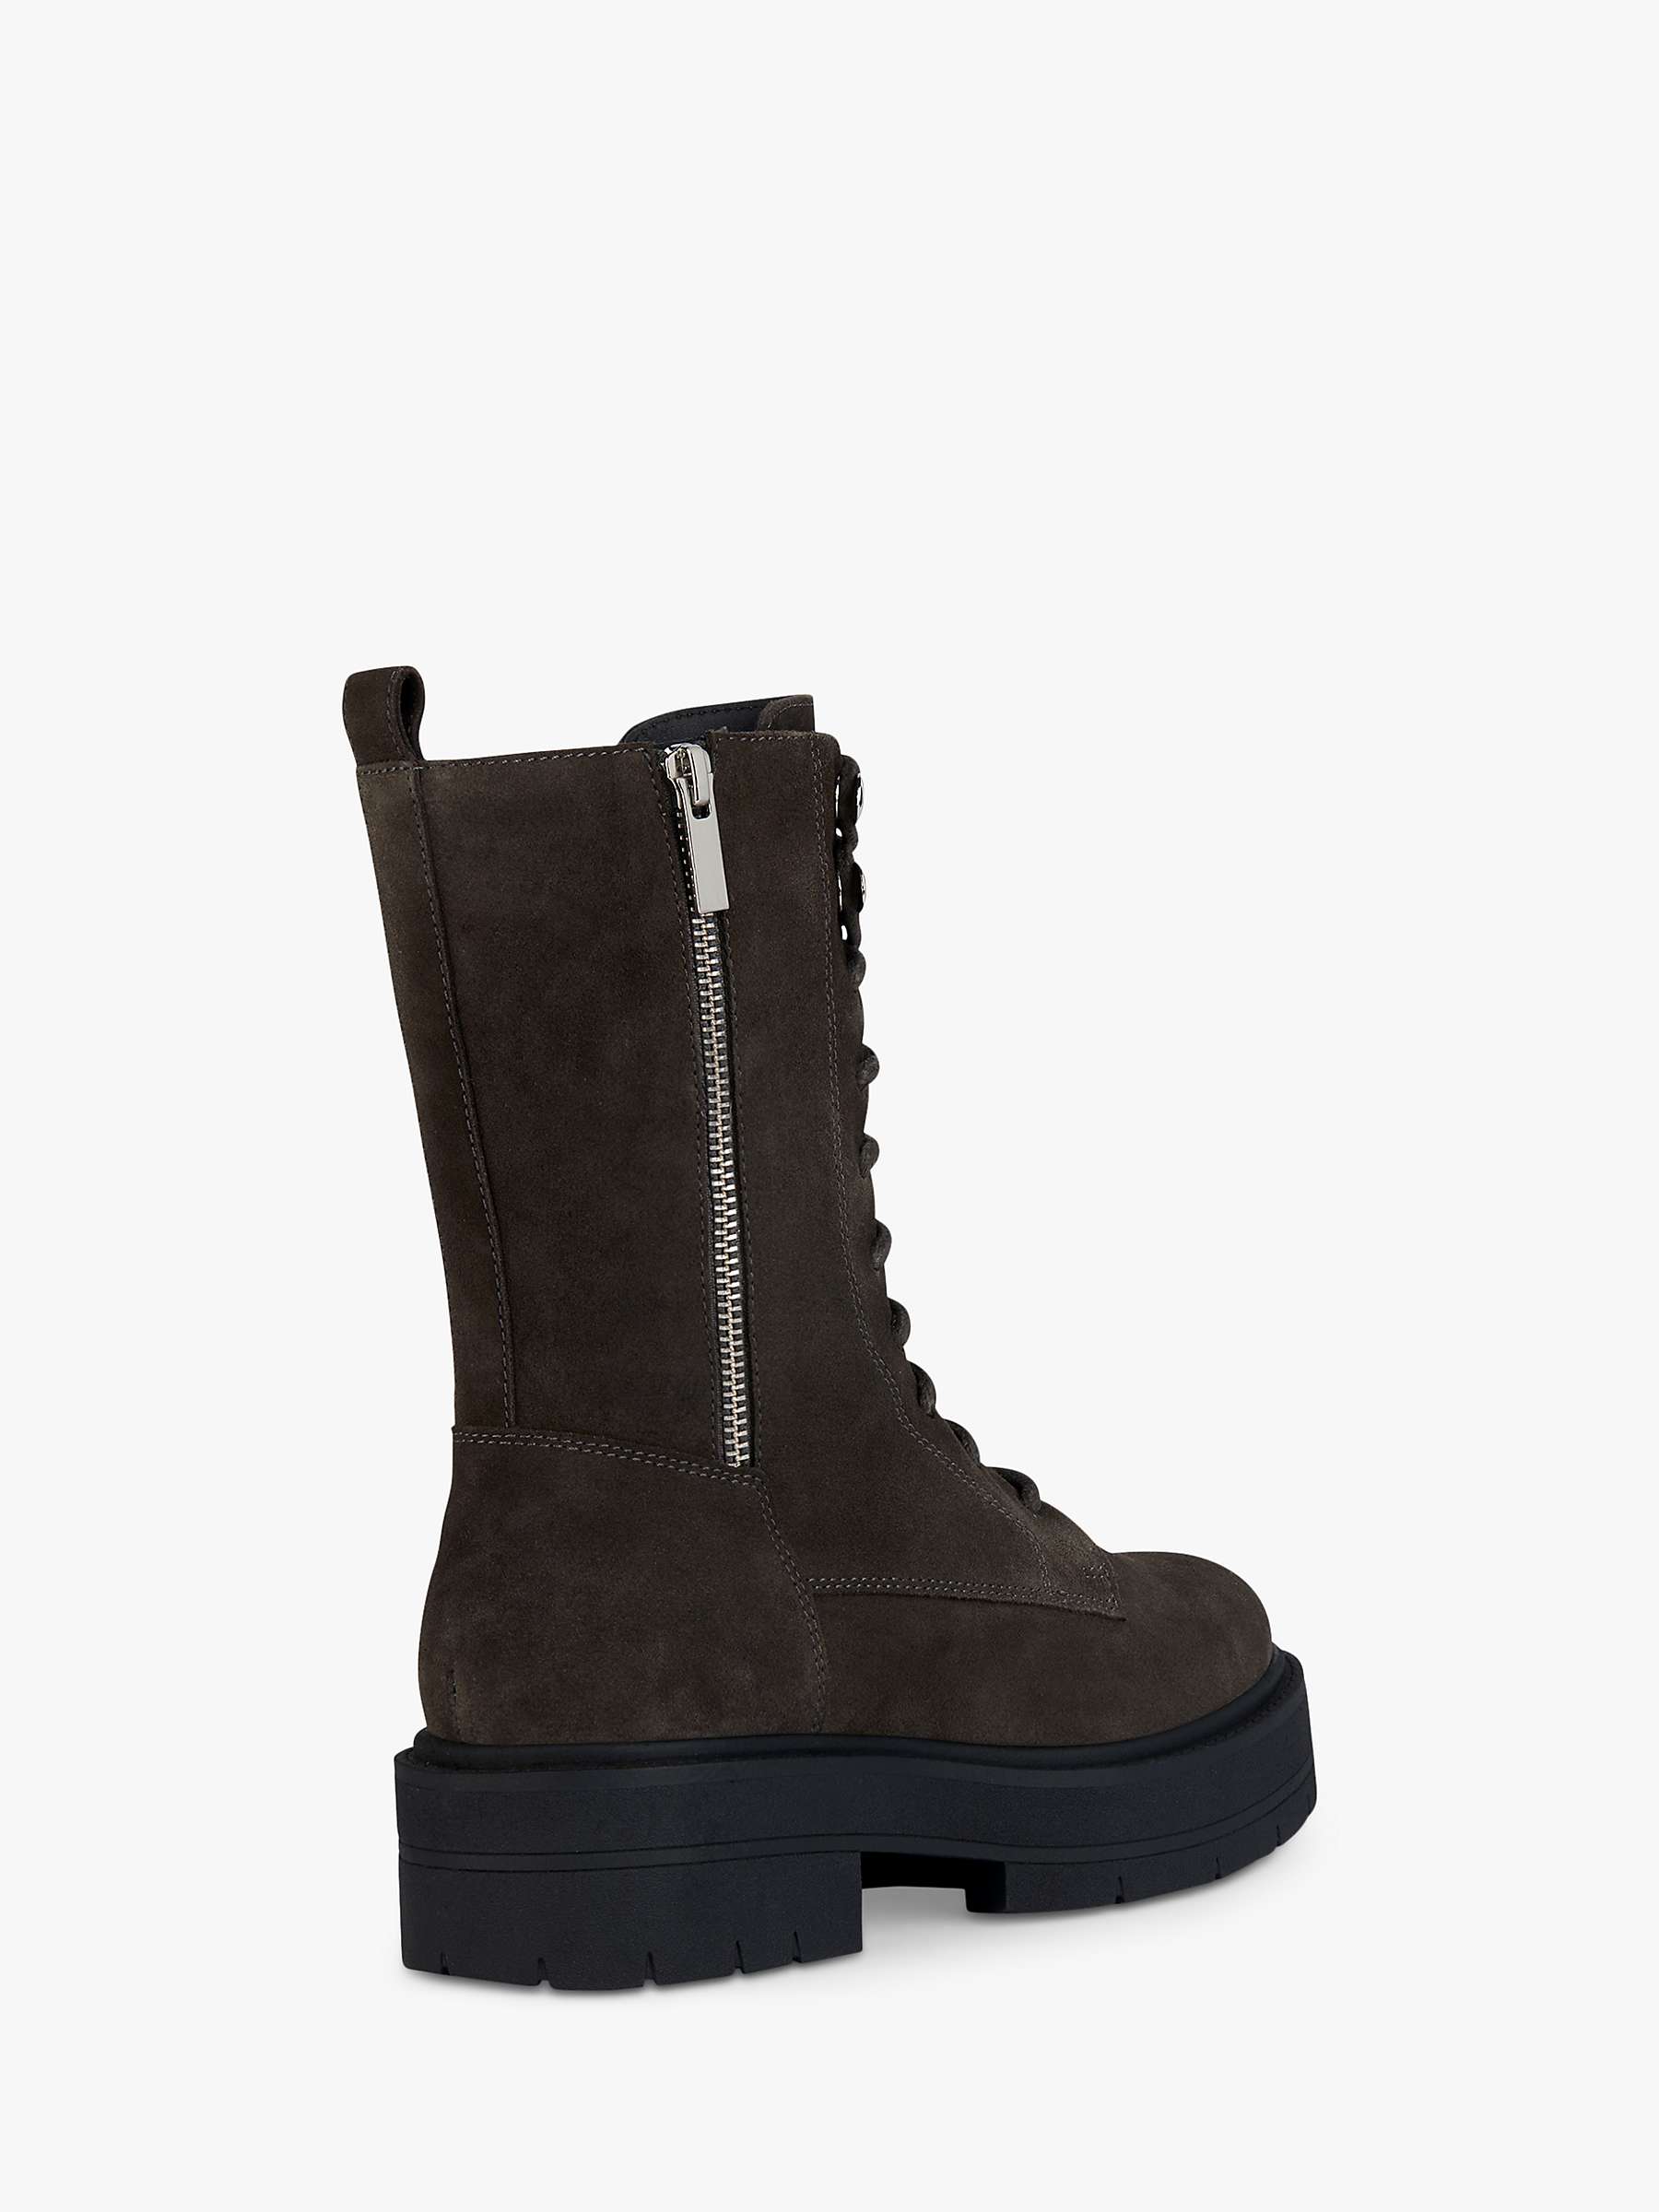 Buy Geox D Spherica EC7 Lace Up Ankle Boots Online at johnlewis.com